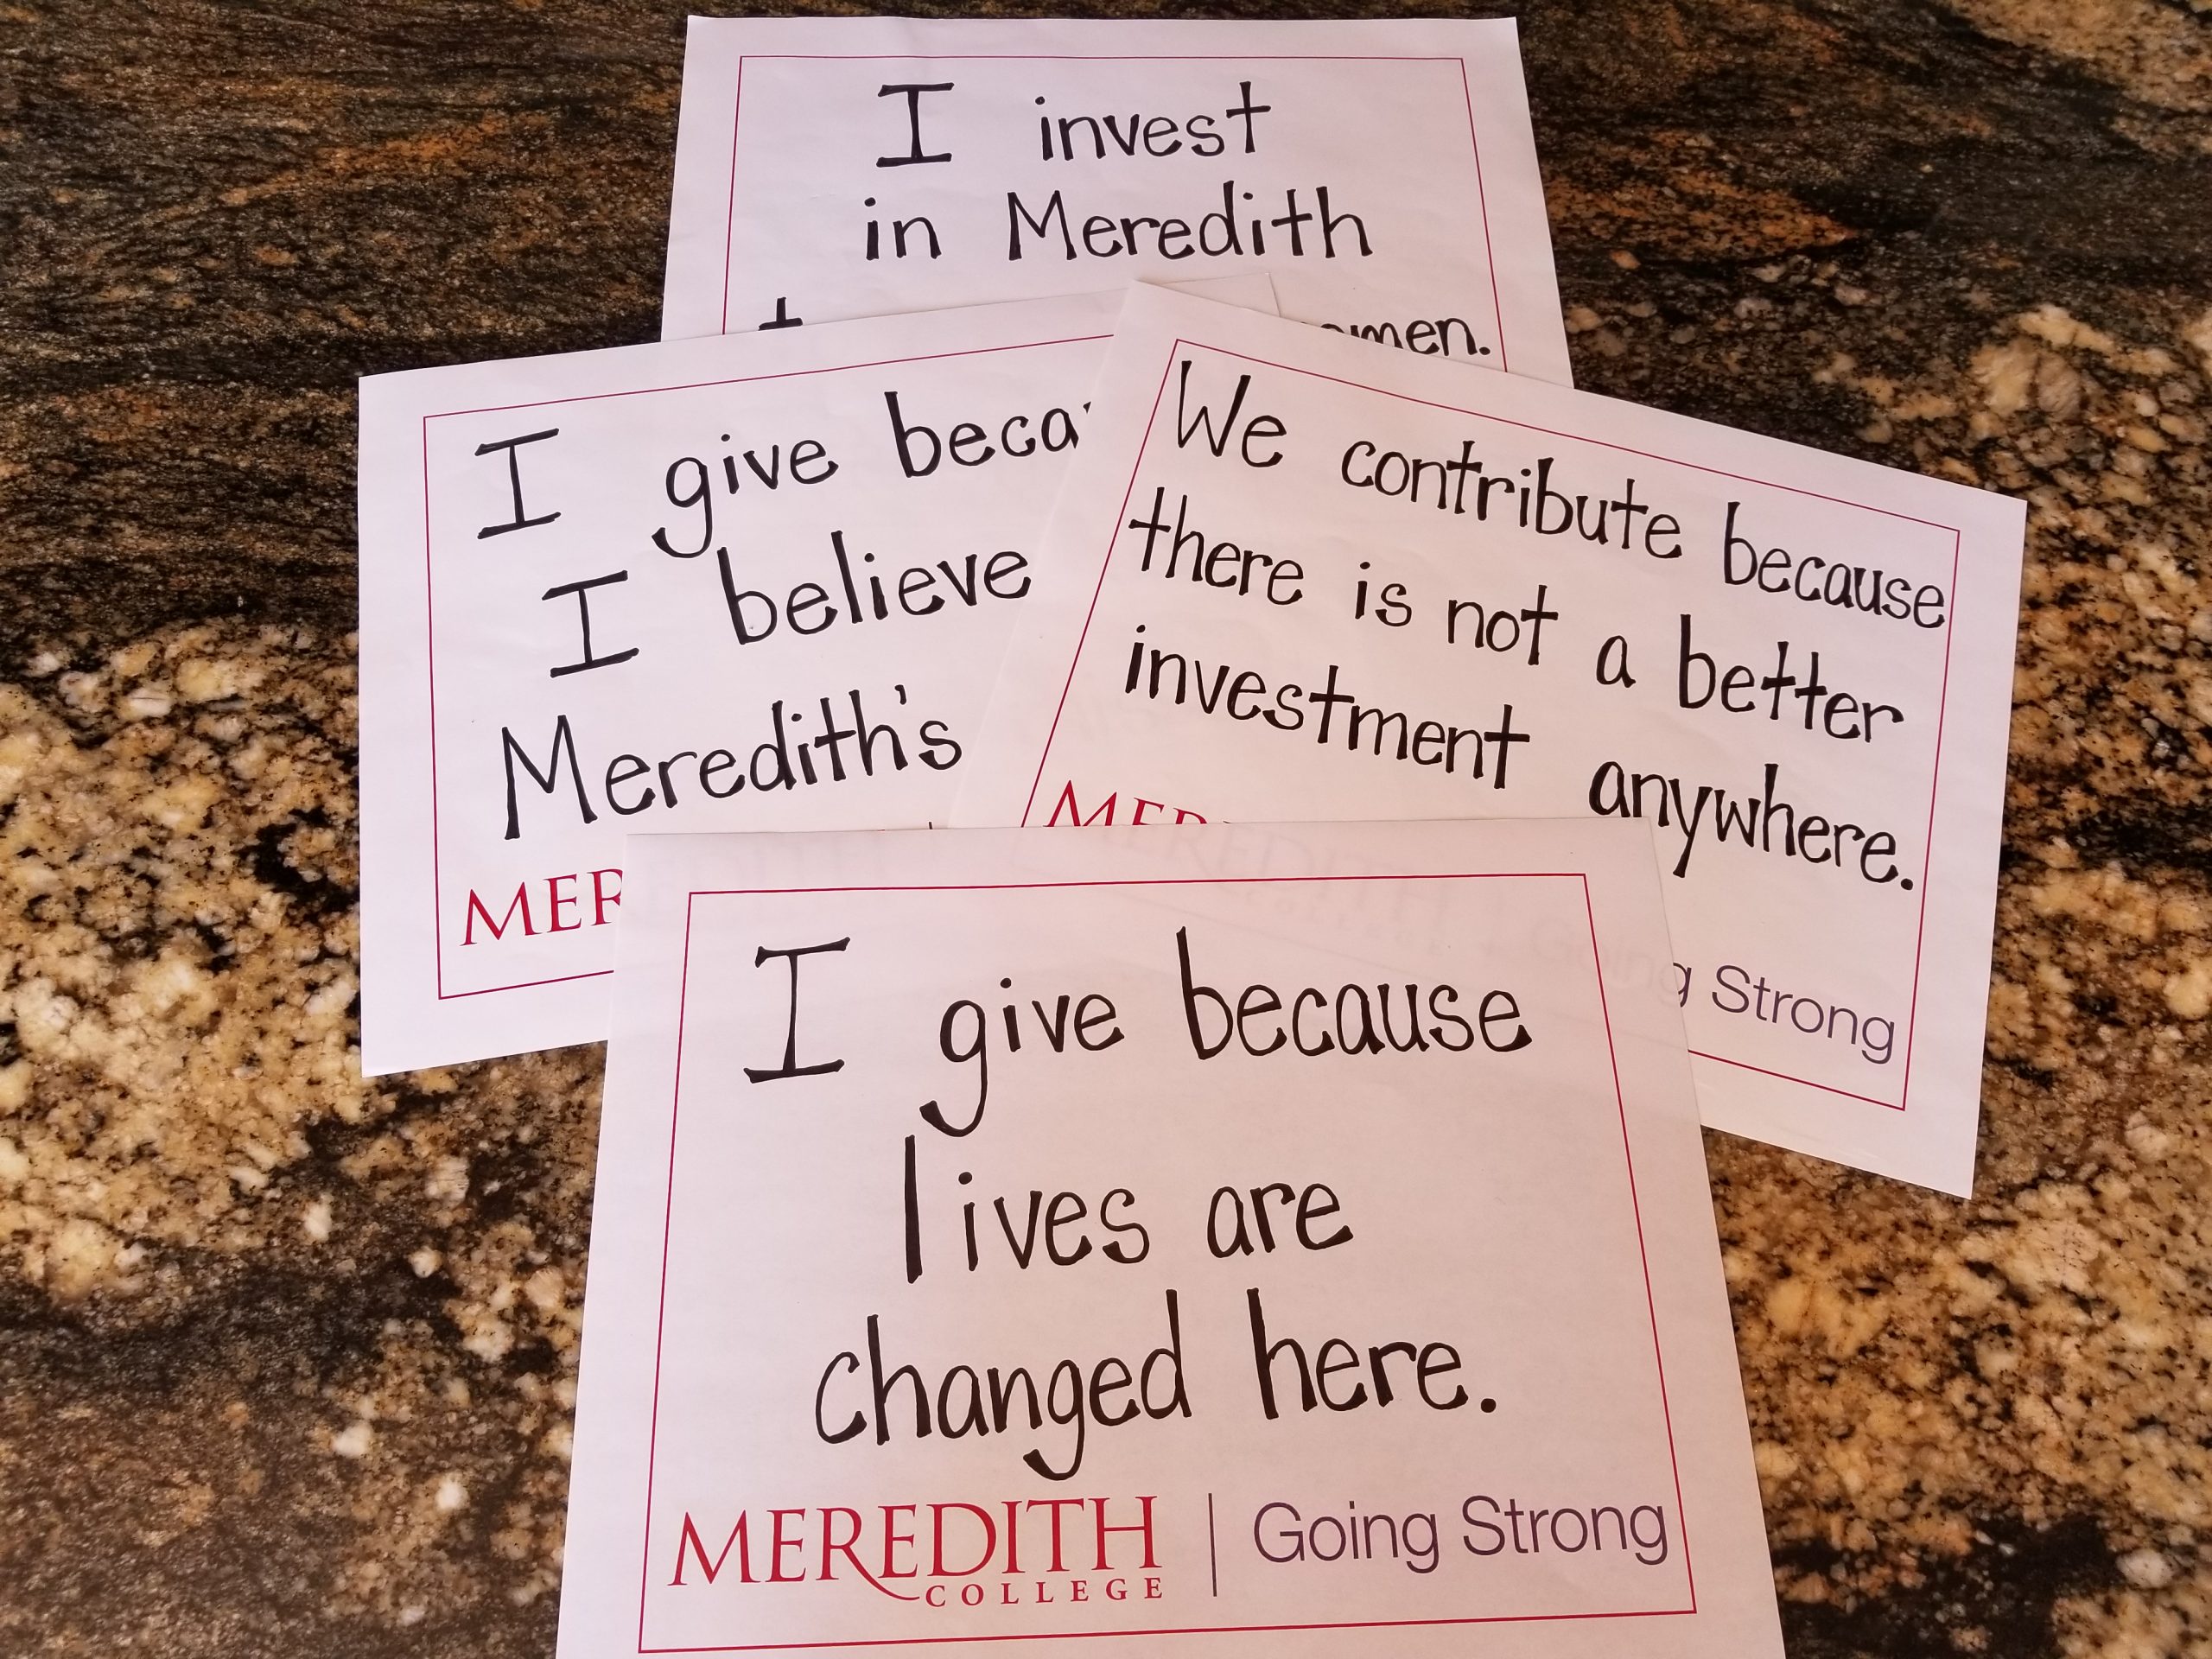 Signs with messages about why donors give to Meredith